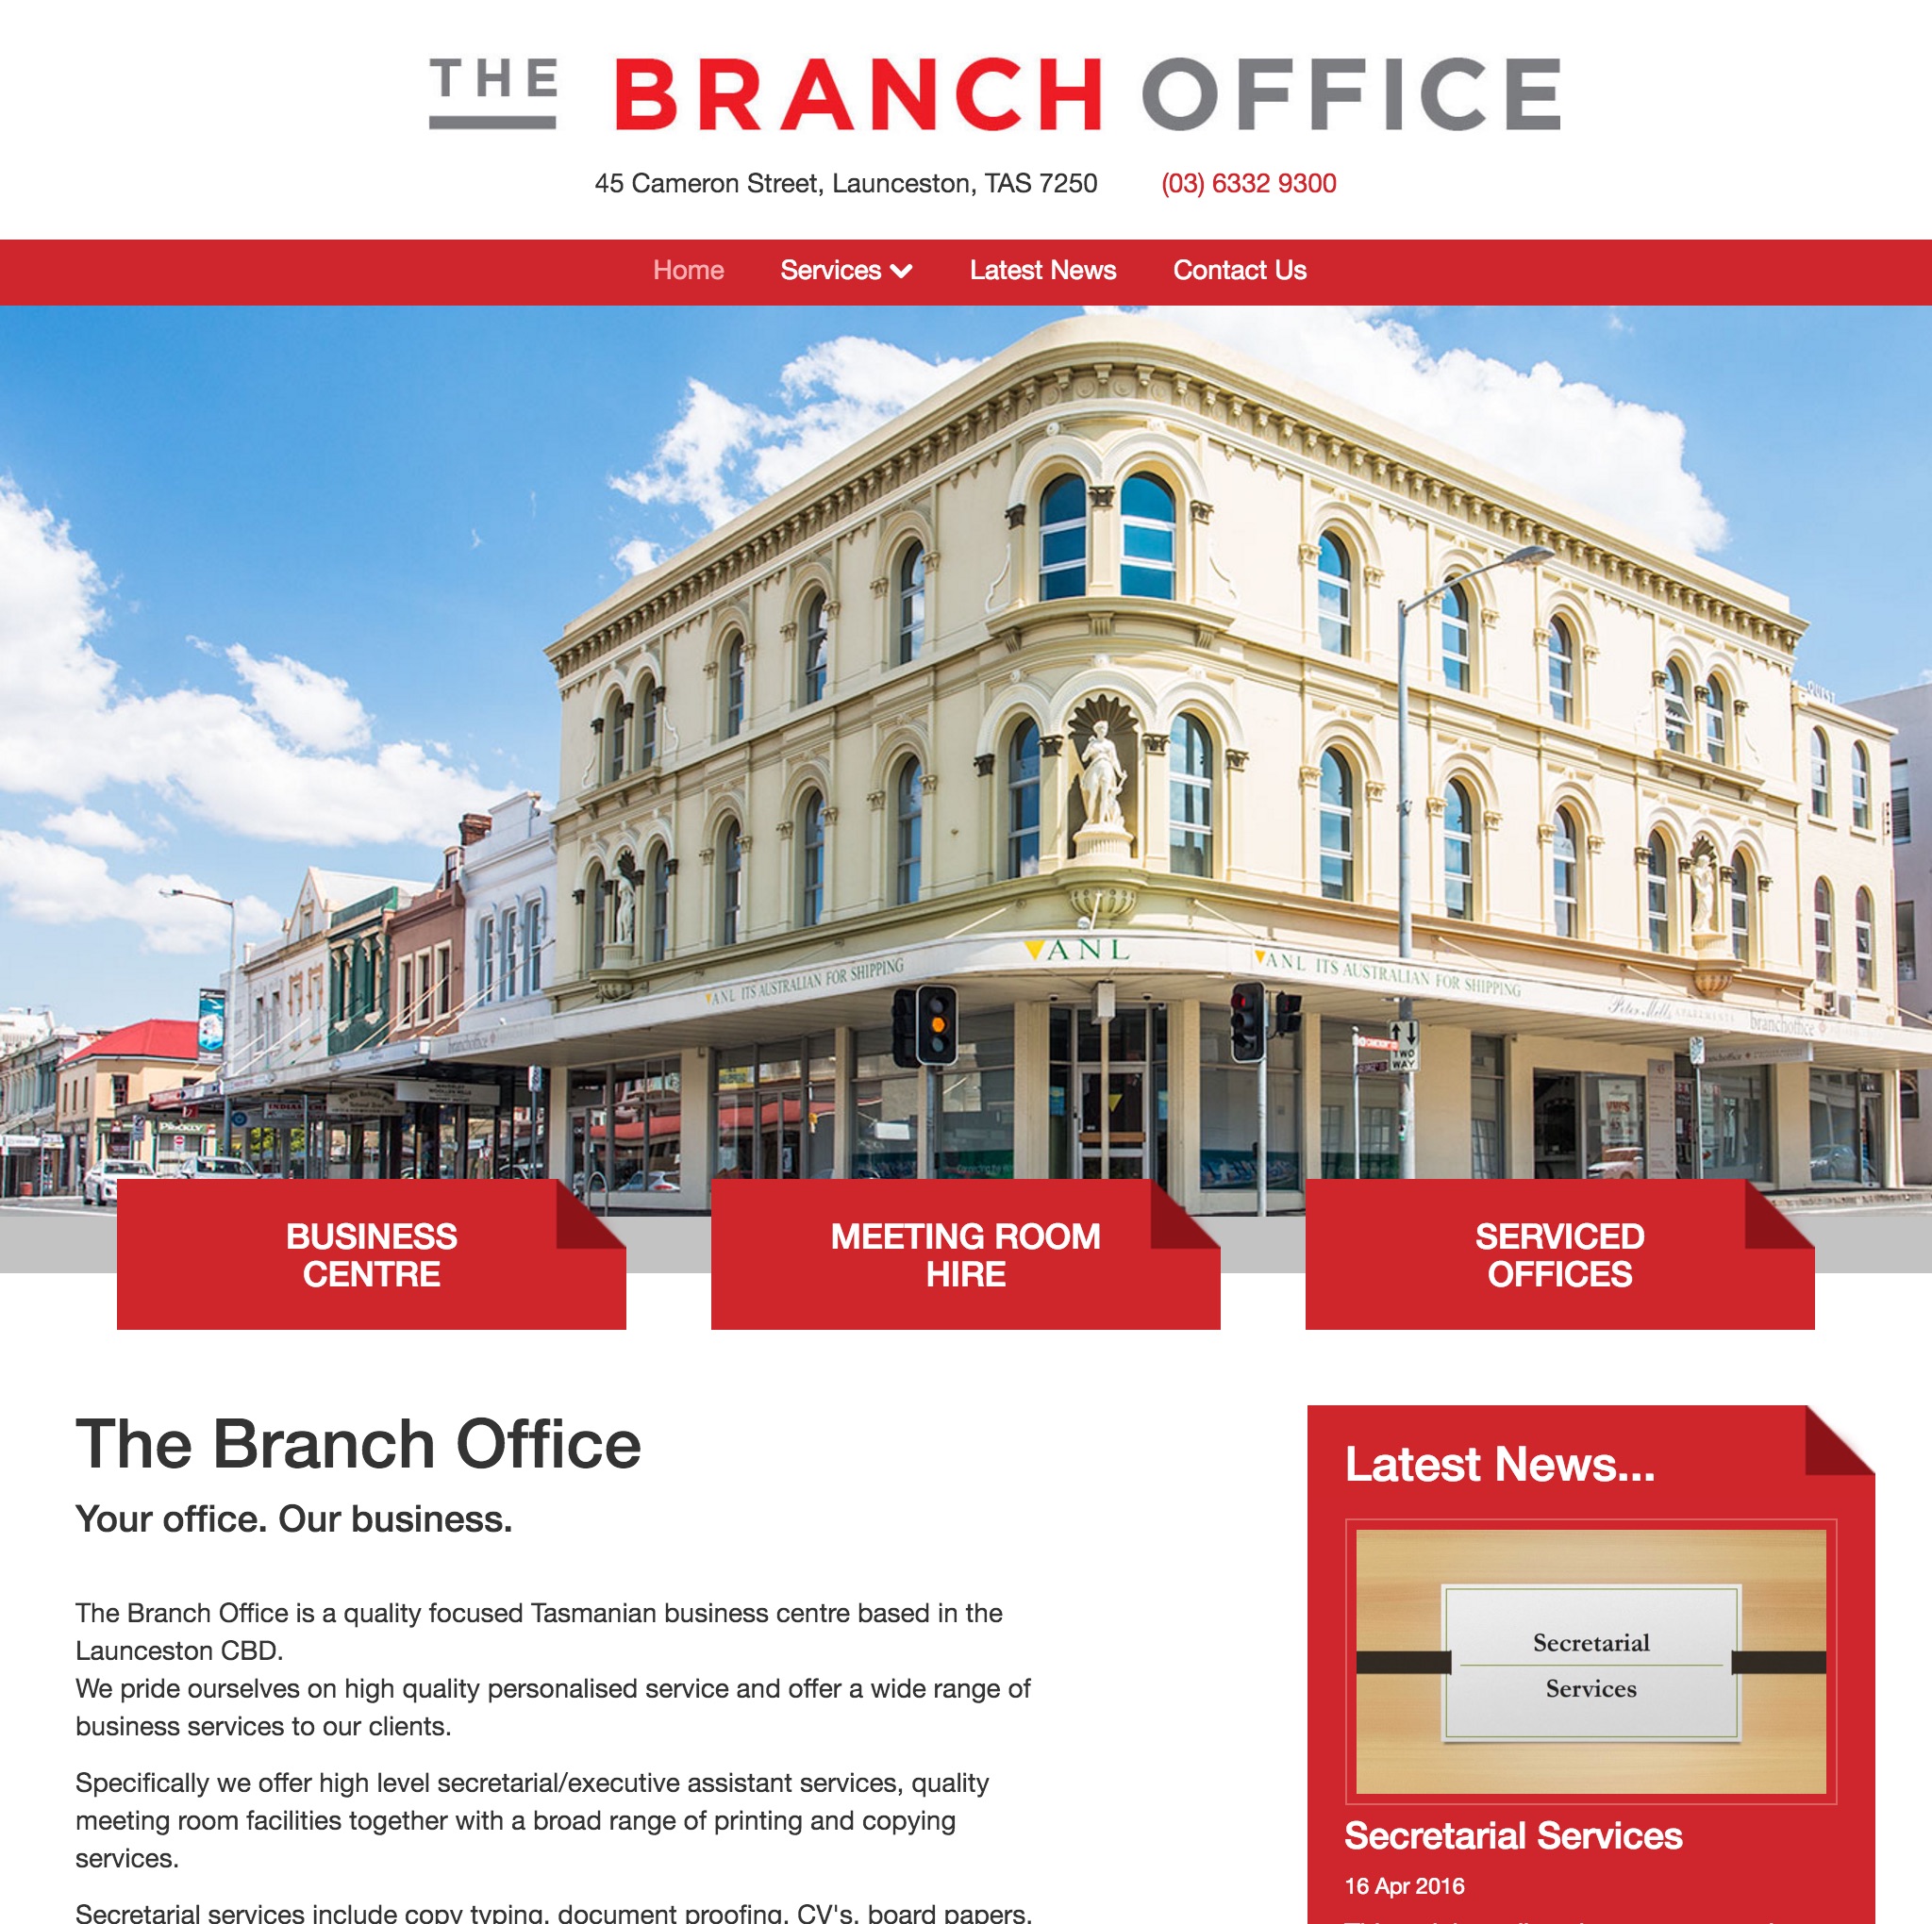 The Branch Office website